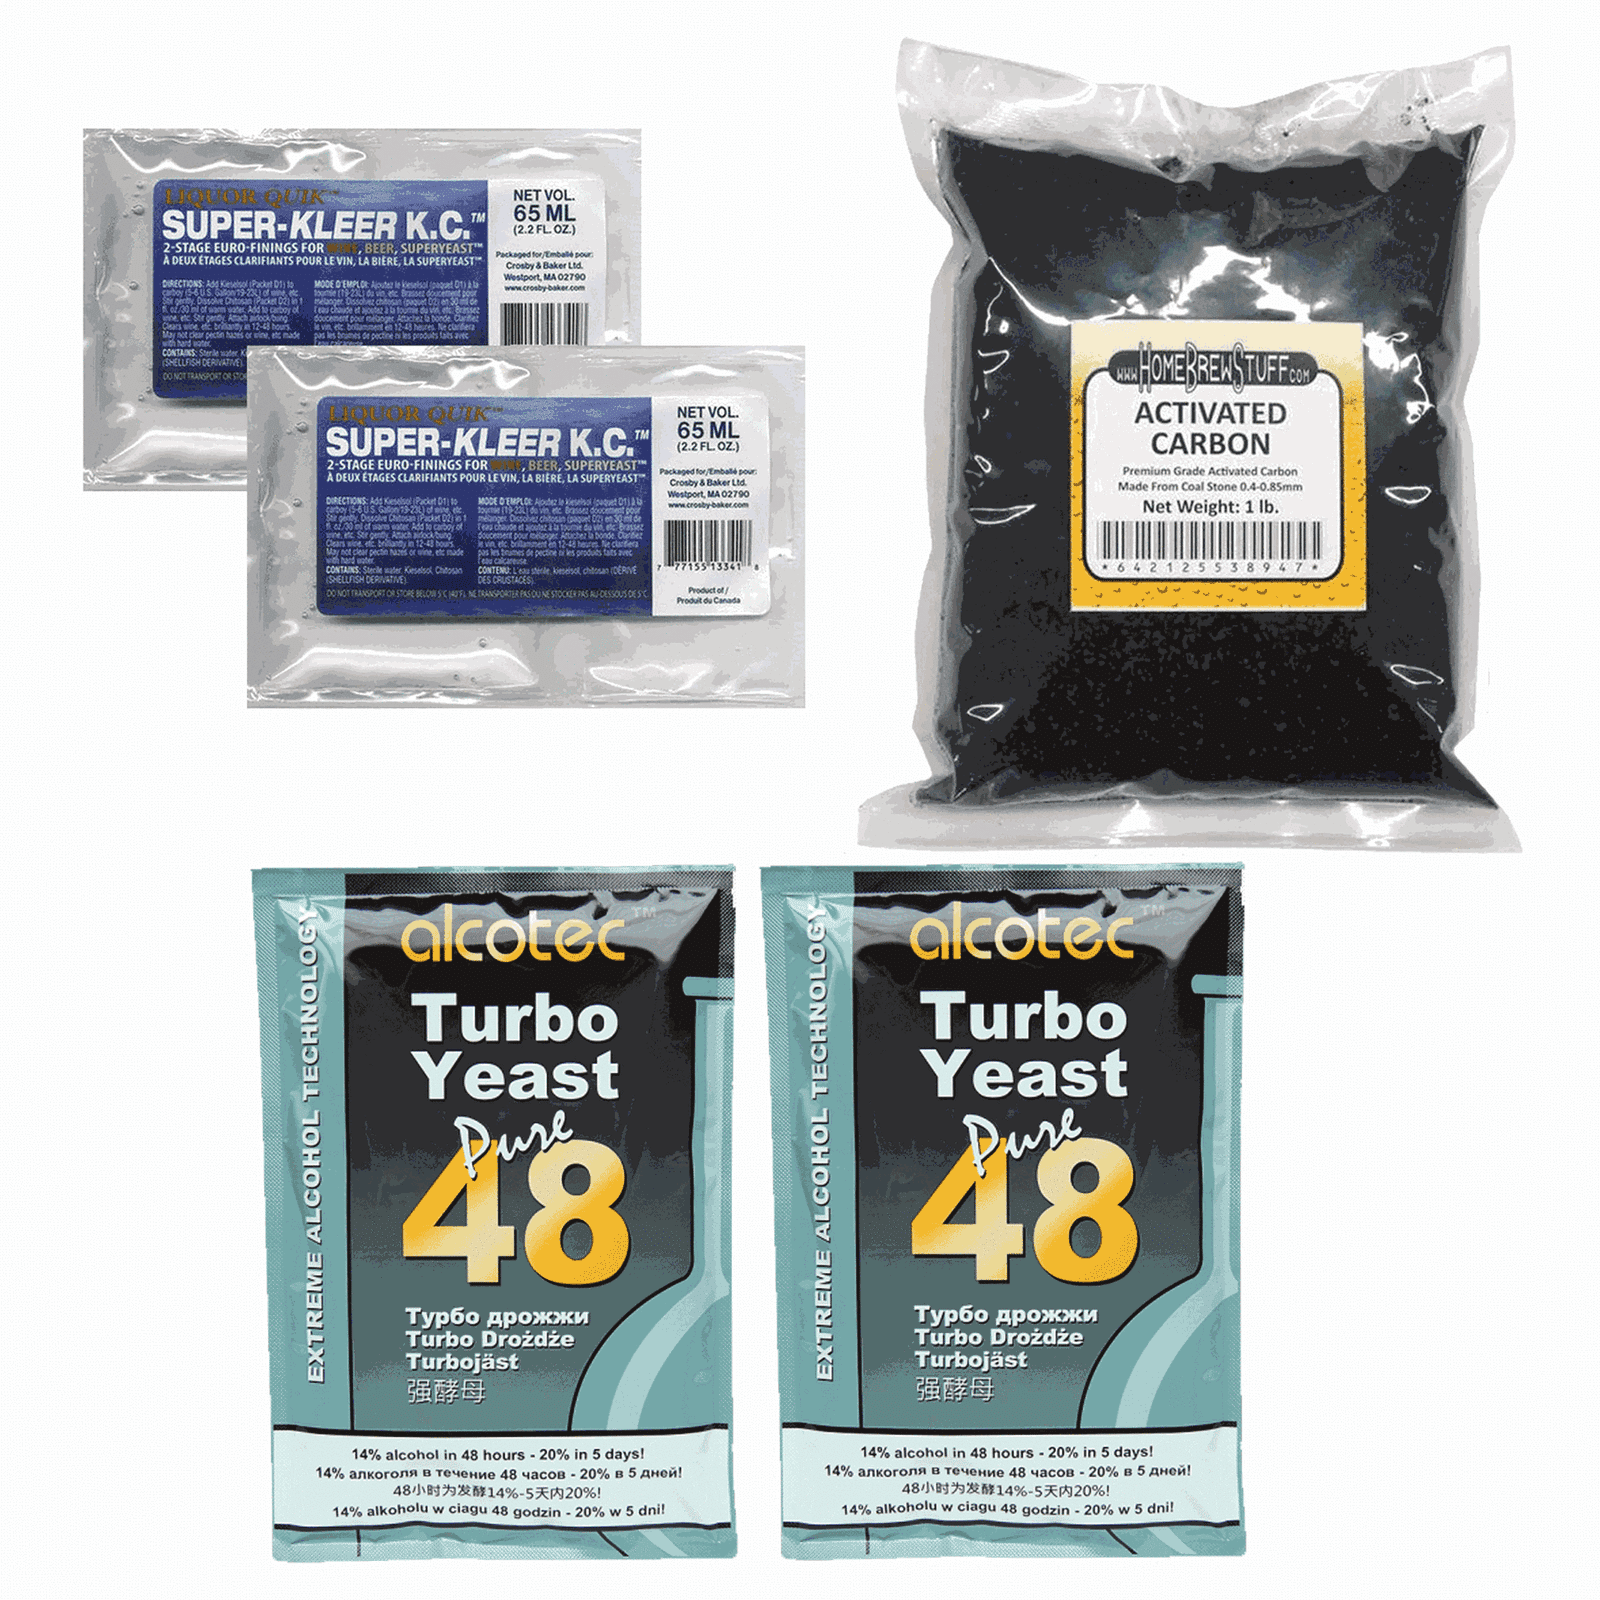 Alcotec 48 Hour Turbo Kit Contains Turbo Yeast Turbo Carbon and Turbo Clear Finings